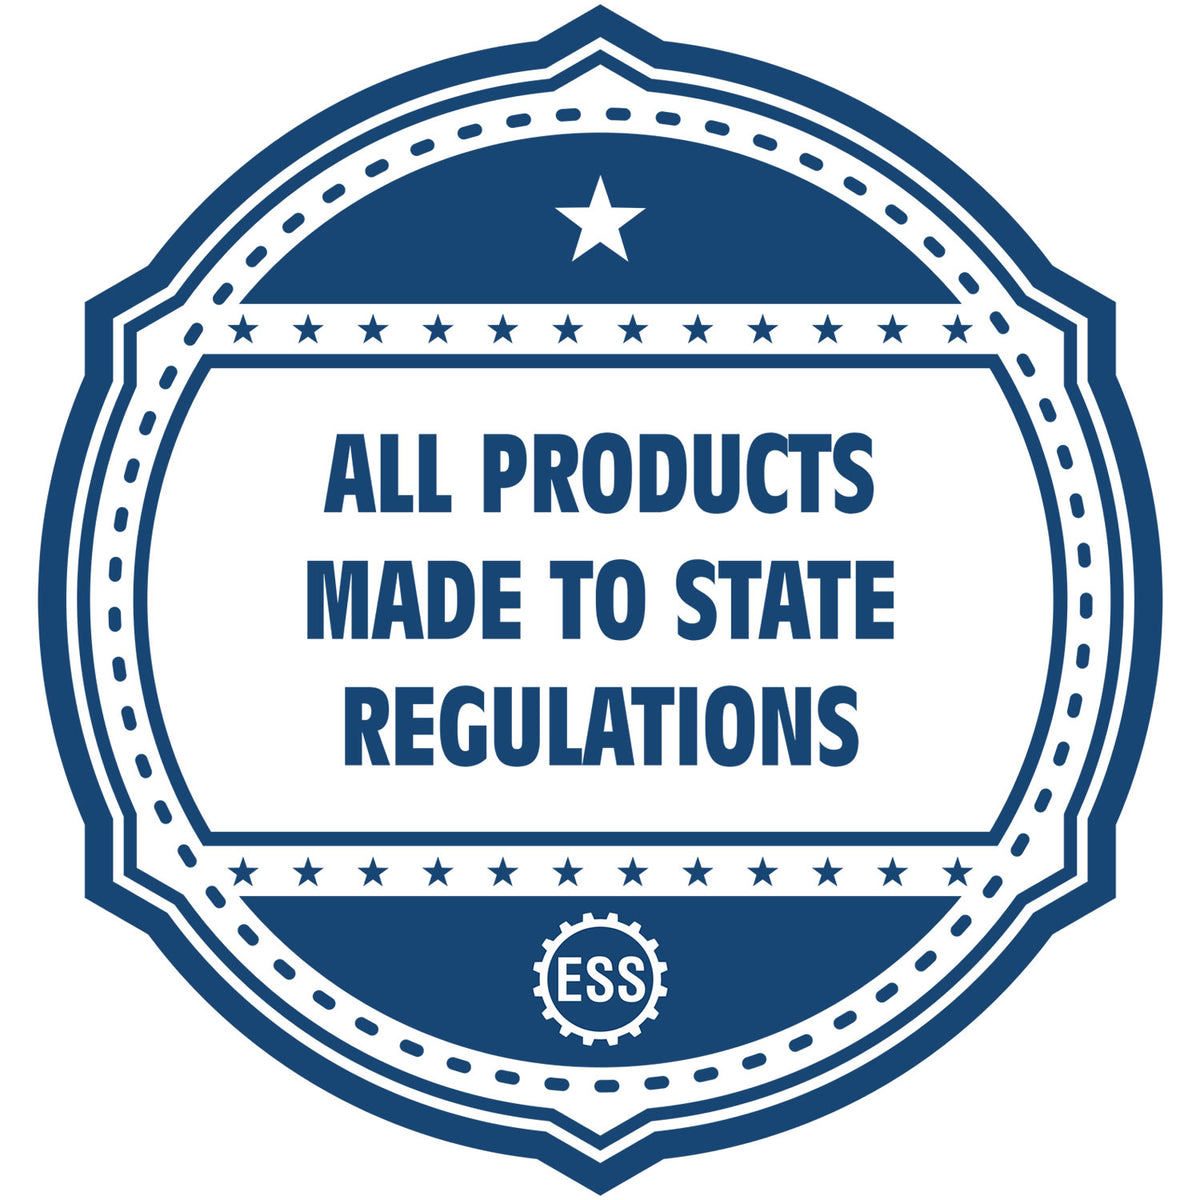 An icon or badge element for the Wooden Handle Washington Rectangular Notary Public Stamp showing that this product is made in compliance with state regulations.